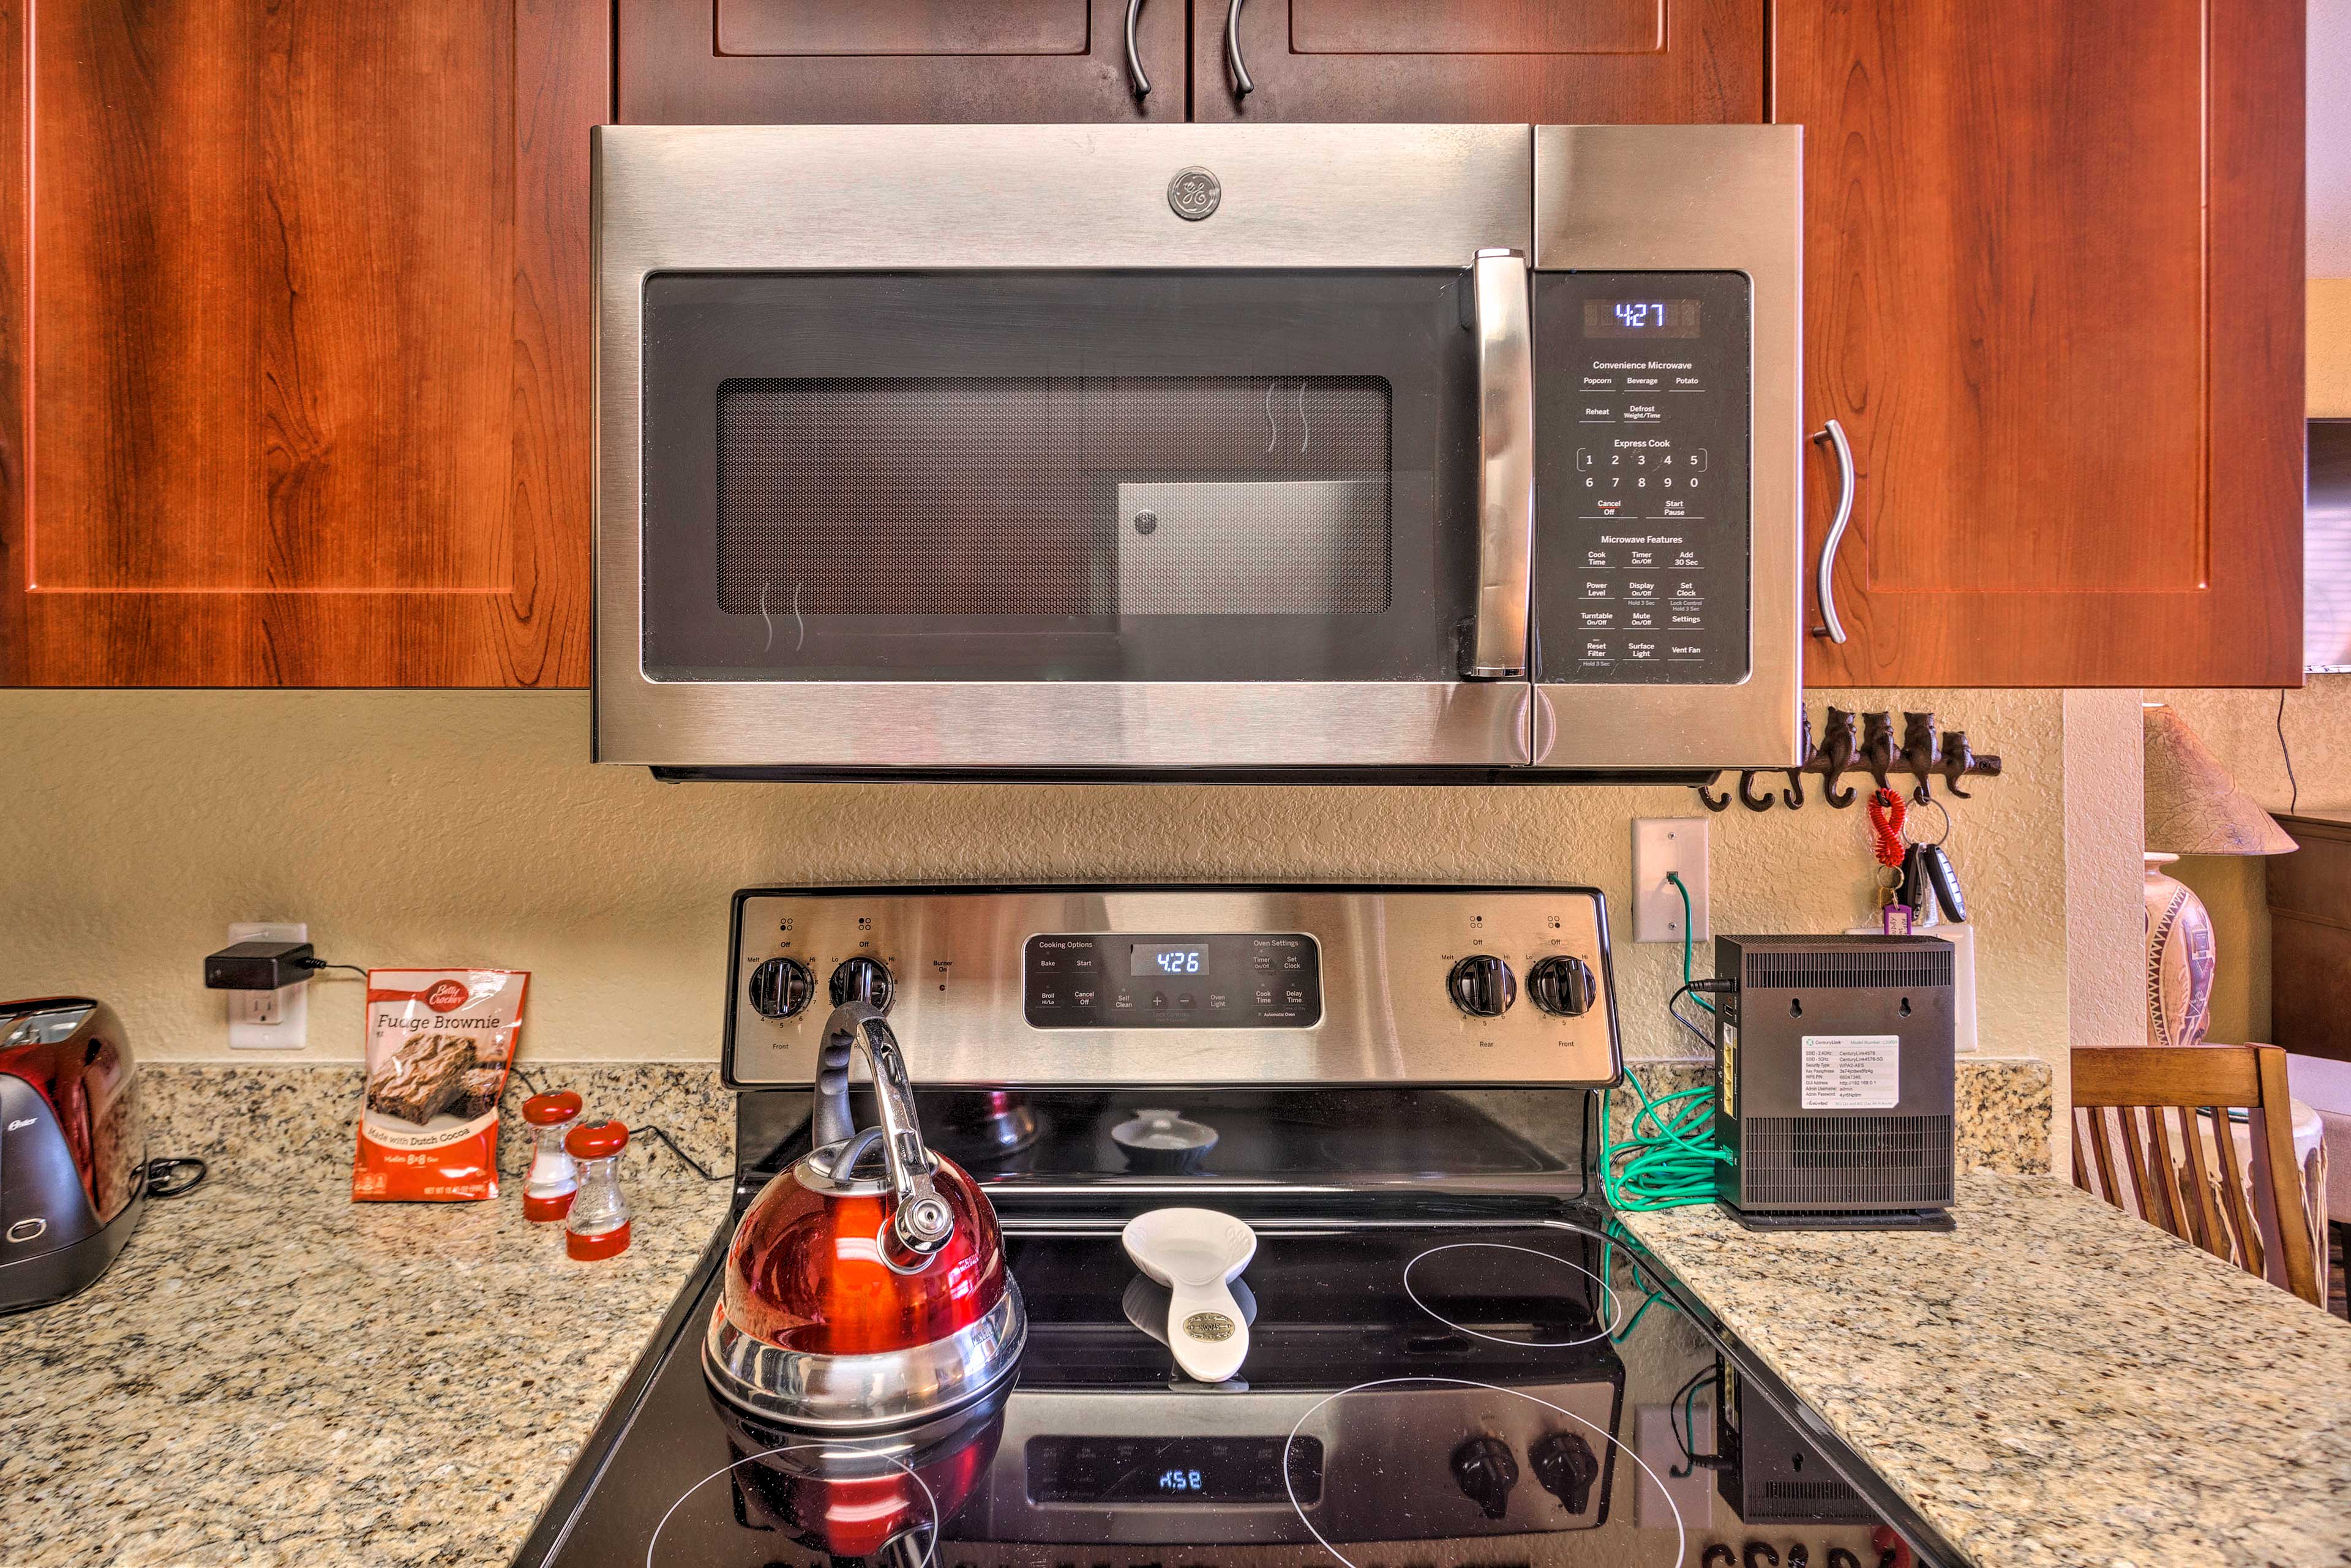 Easily prepare all your favorite meals in the fully equipped kitchen.